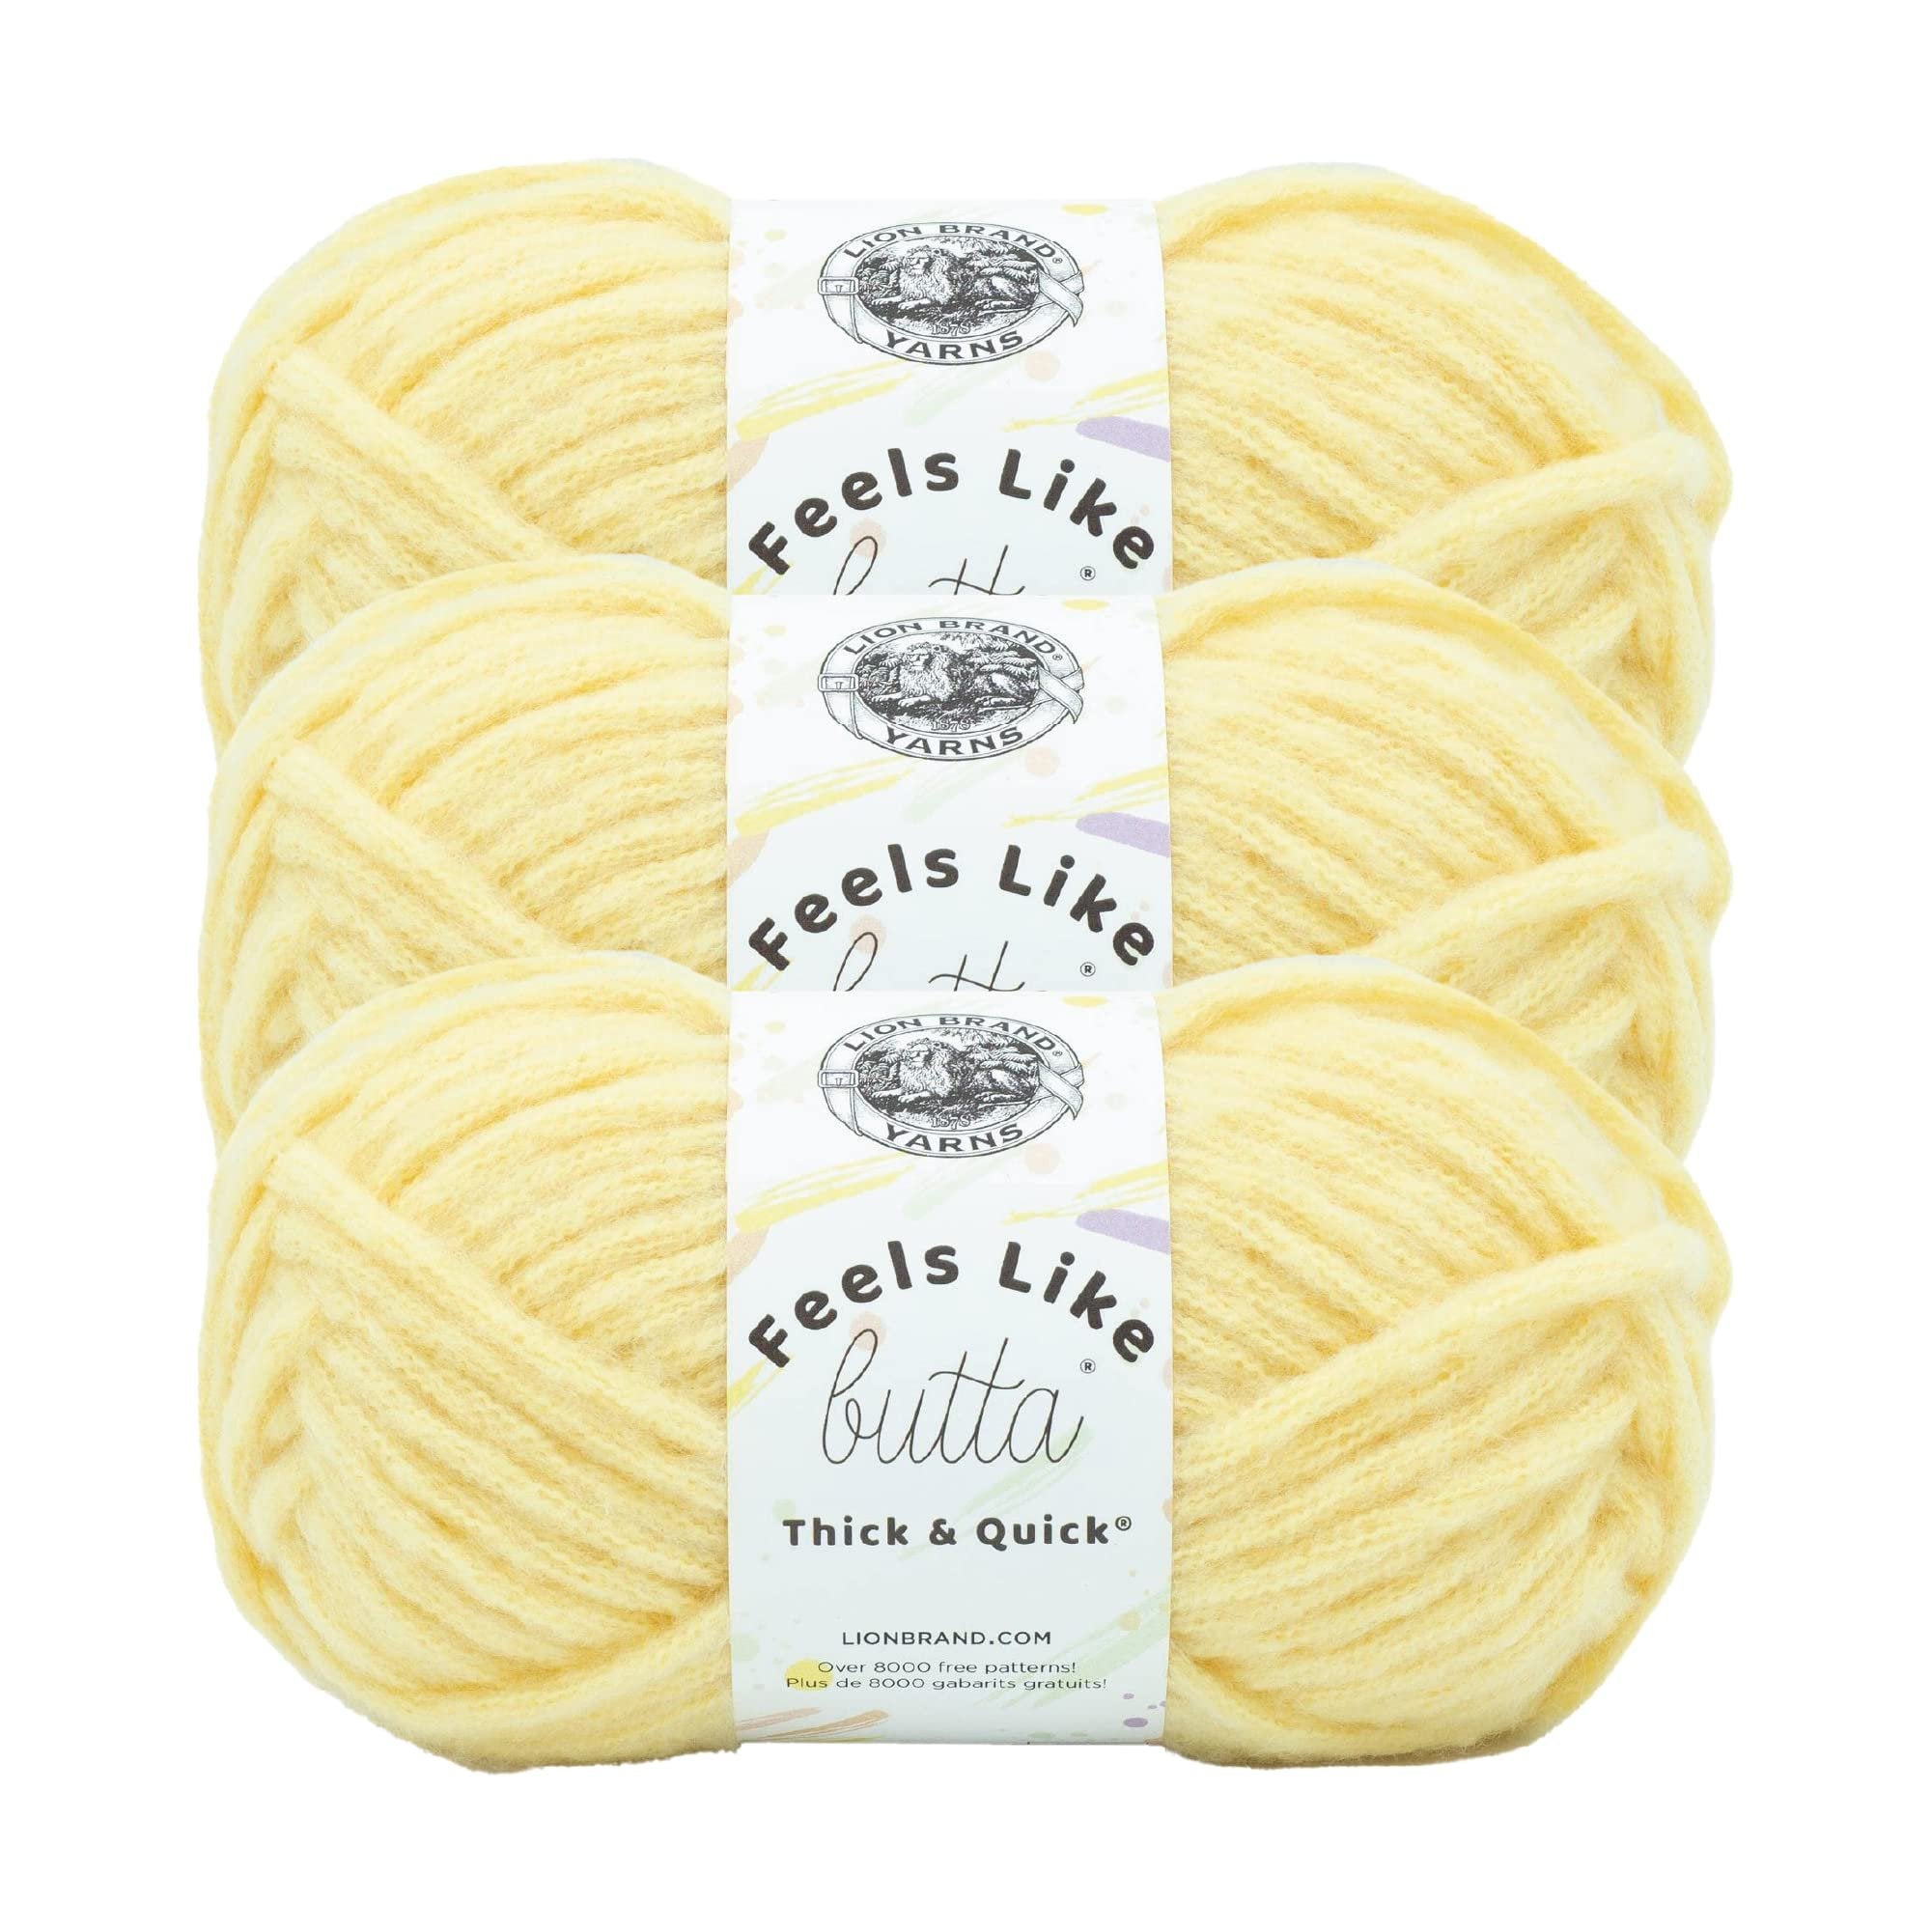 Lion Brand Yarn Feels Like Butta Thick & Quick Super Bulky Yarn for Knitting, 3 Pack, Buttered Popcorn